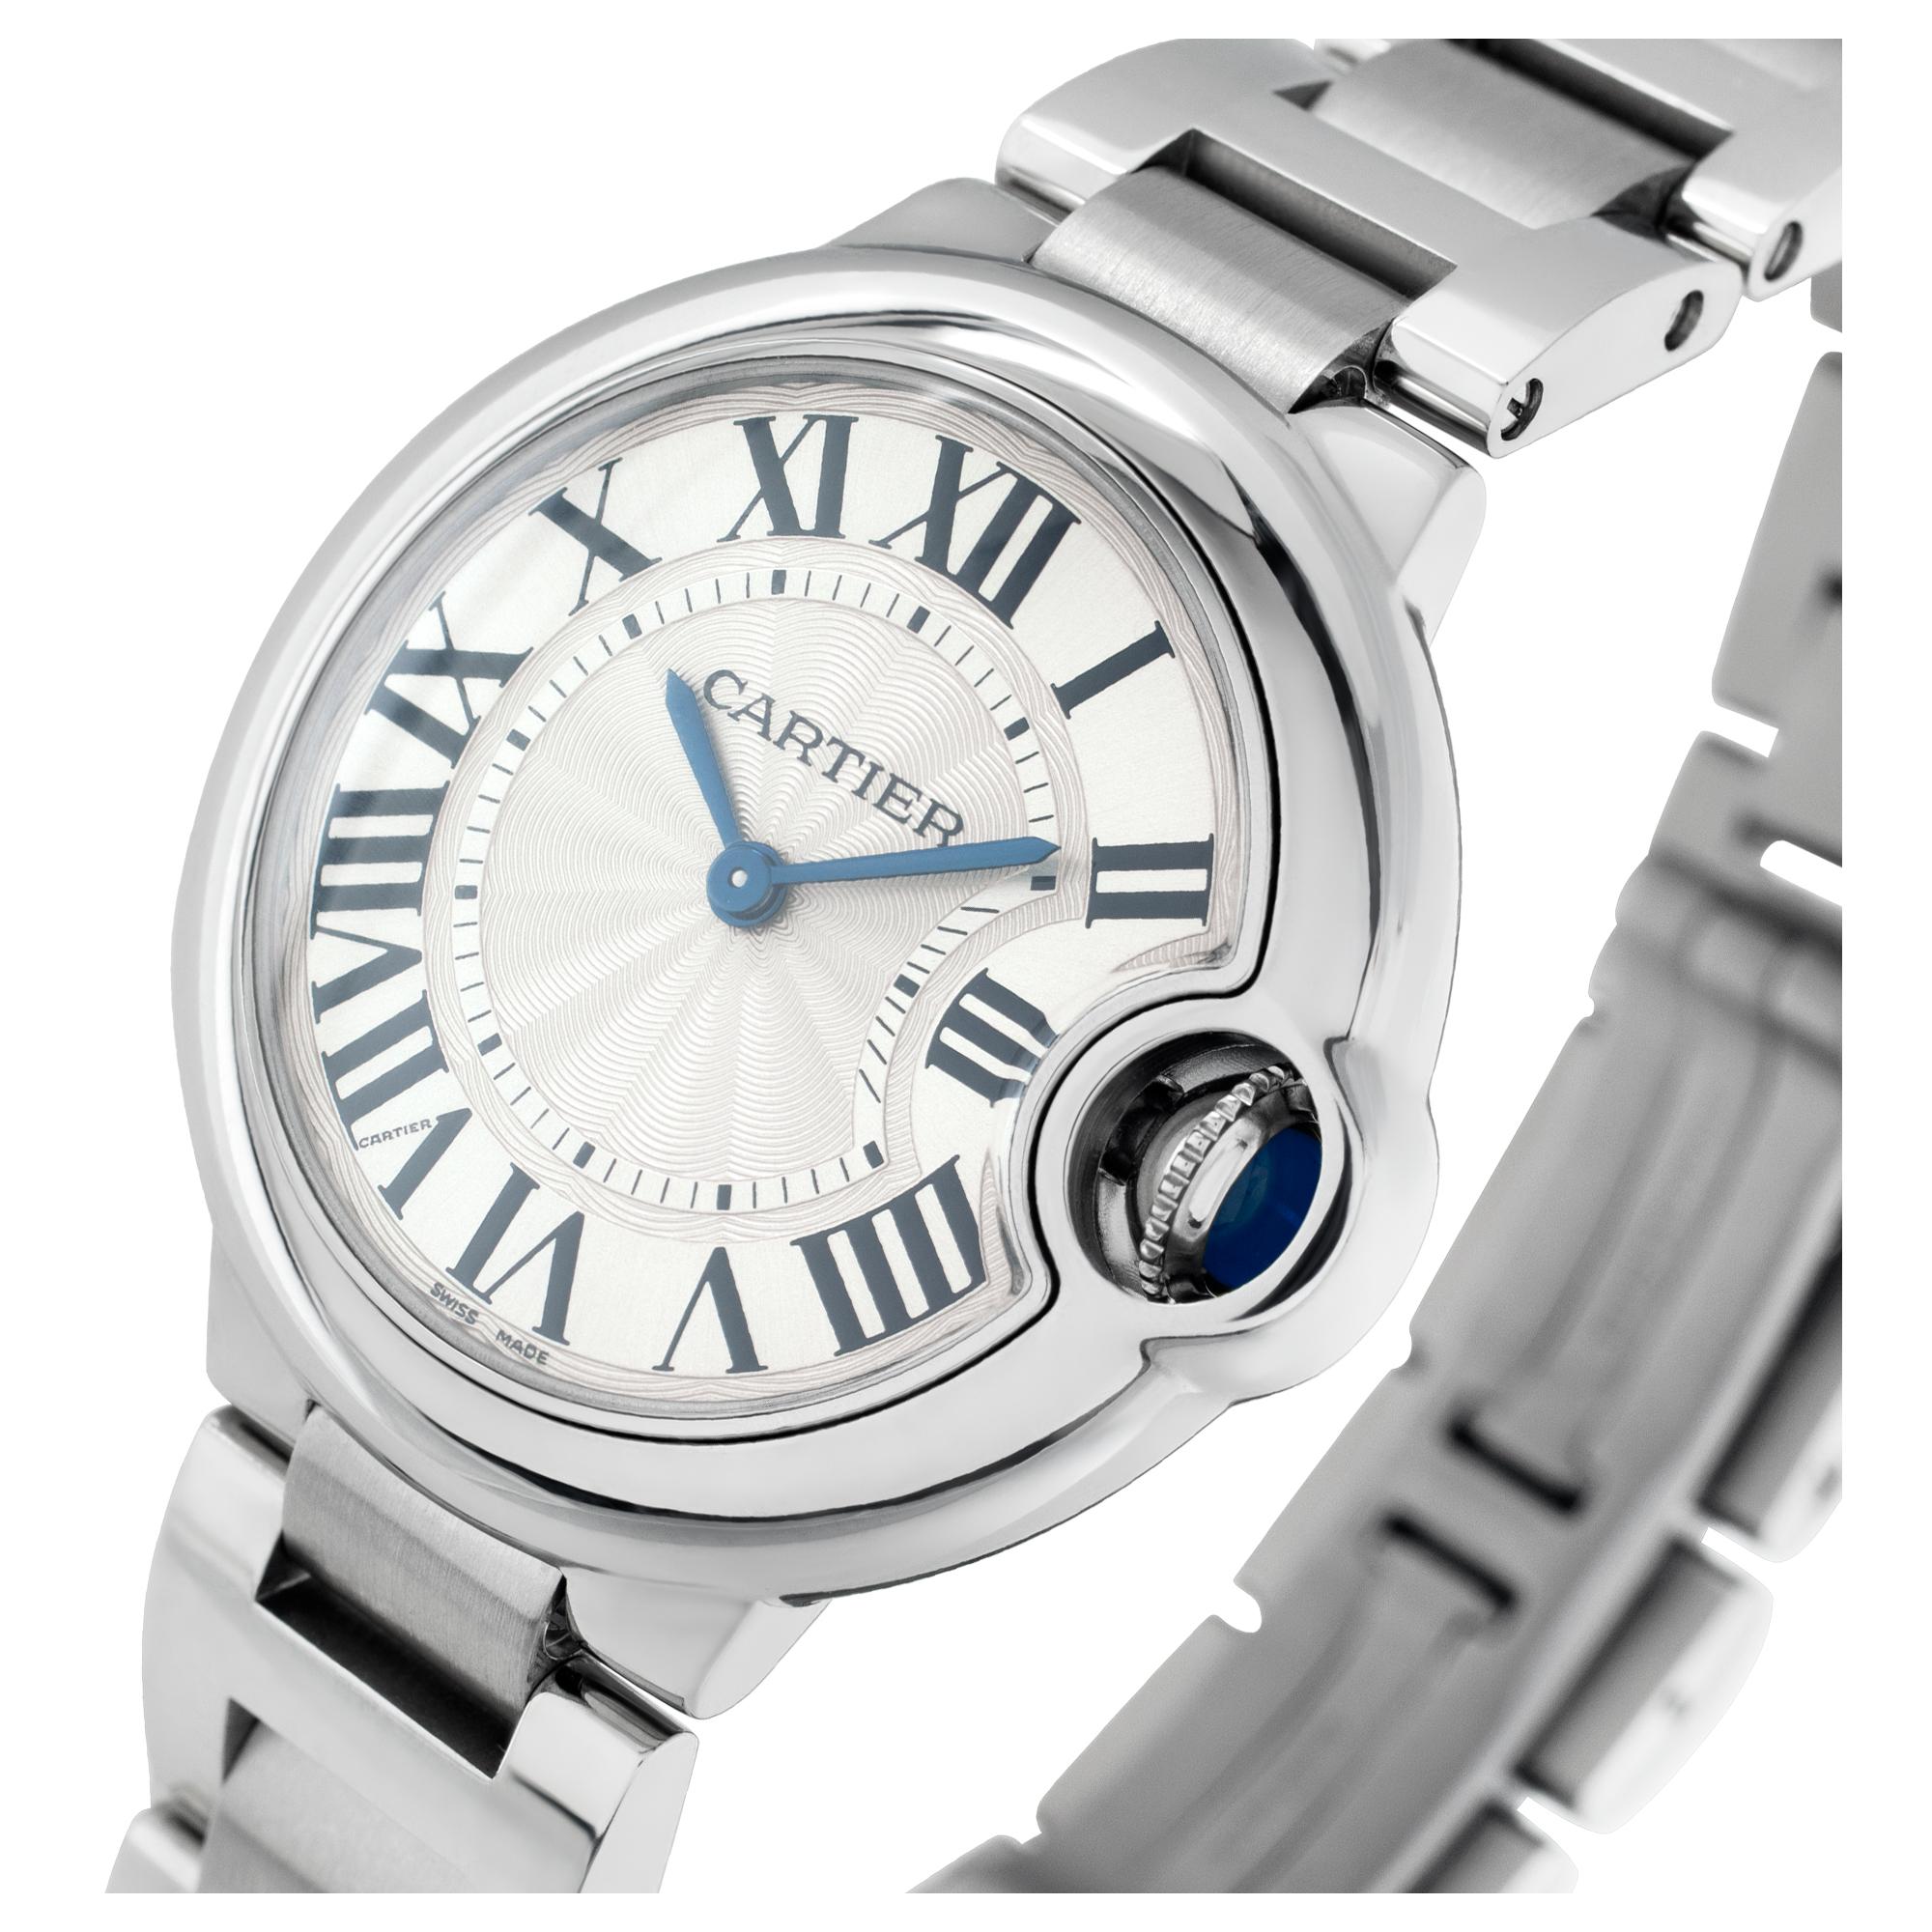 Cartier Ballon Bleu in stainless steel on steel link bracelet with hidden buckle. Quartz. 33 mm case size. Ref W6920084. Fine Pre-owned Cartier Watch. Certified preowned Classic Cartier Ballon Bleu W6920084 watch is made out of Stainless steel on a